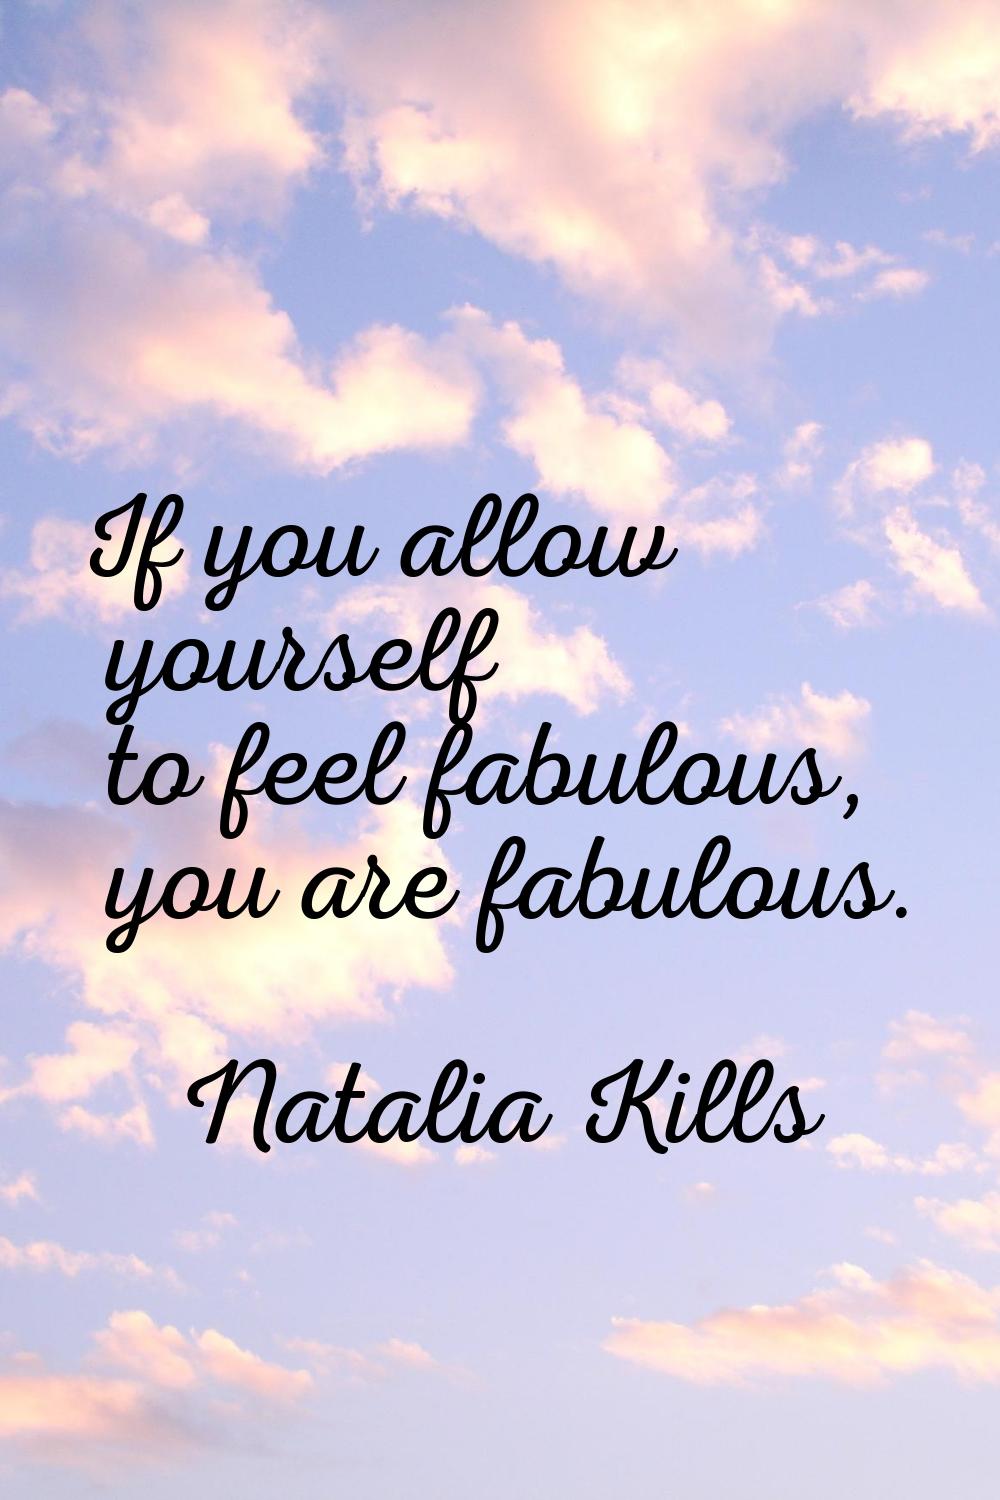 If you allow yourself to feel fabulous, you are fabulous.